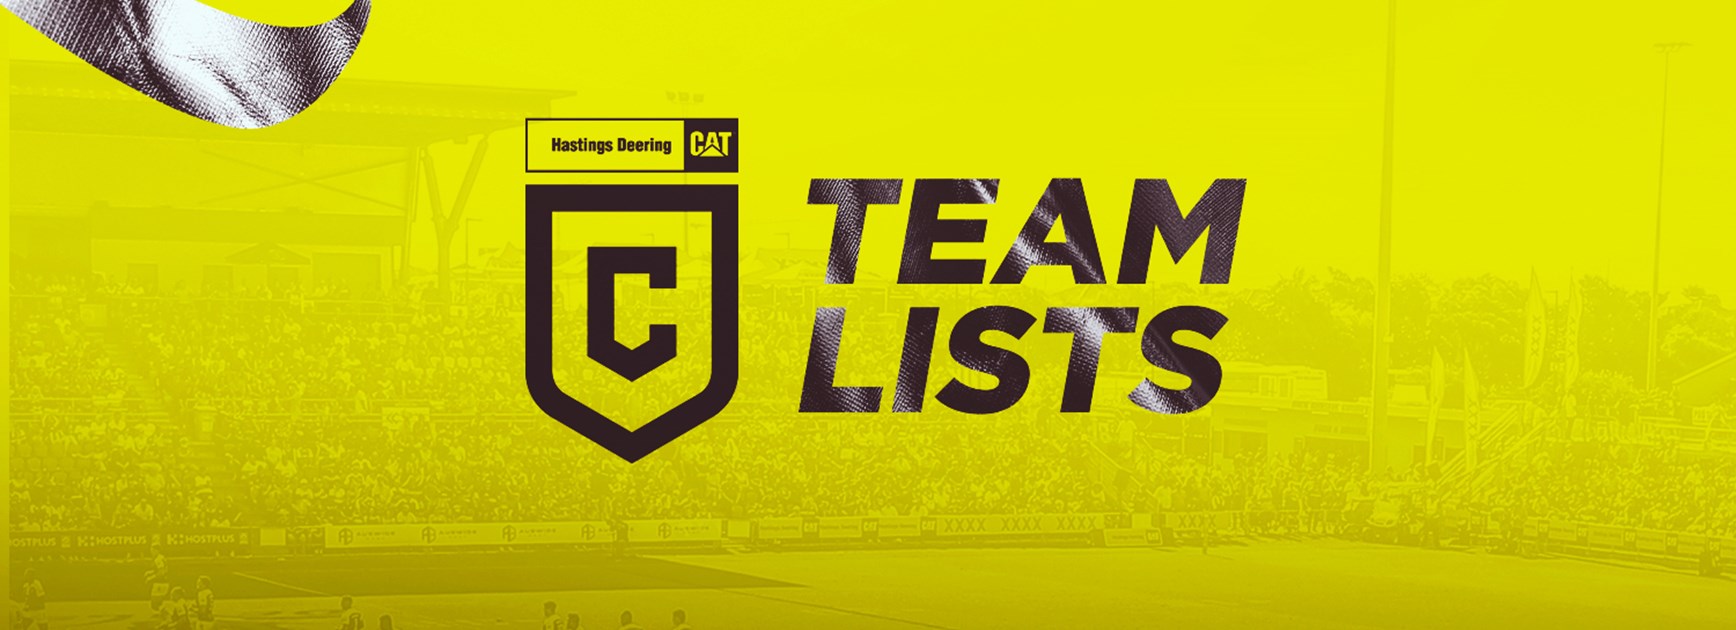 Round 6 Hastings Deering Colts team lists